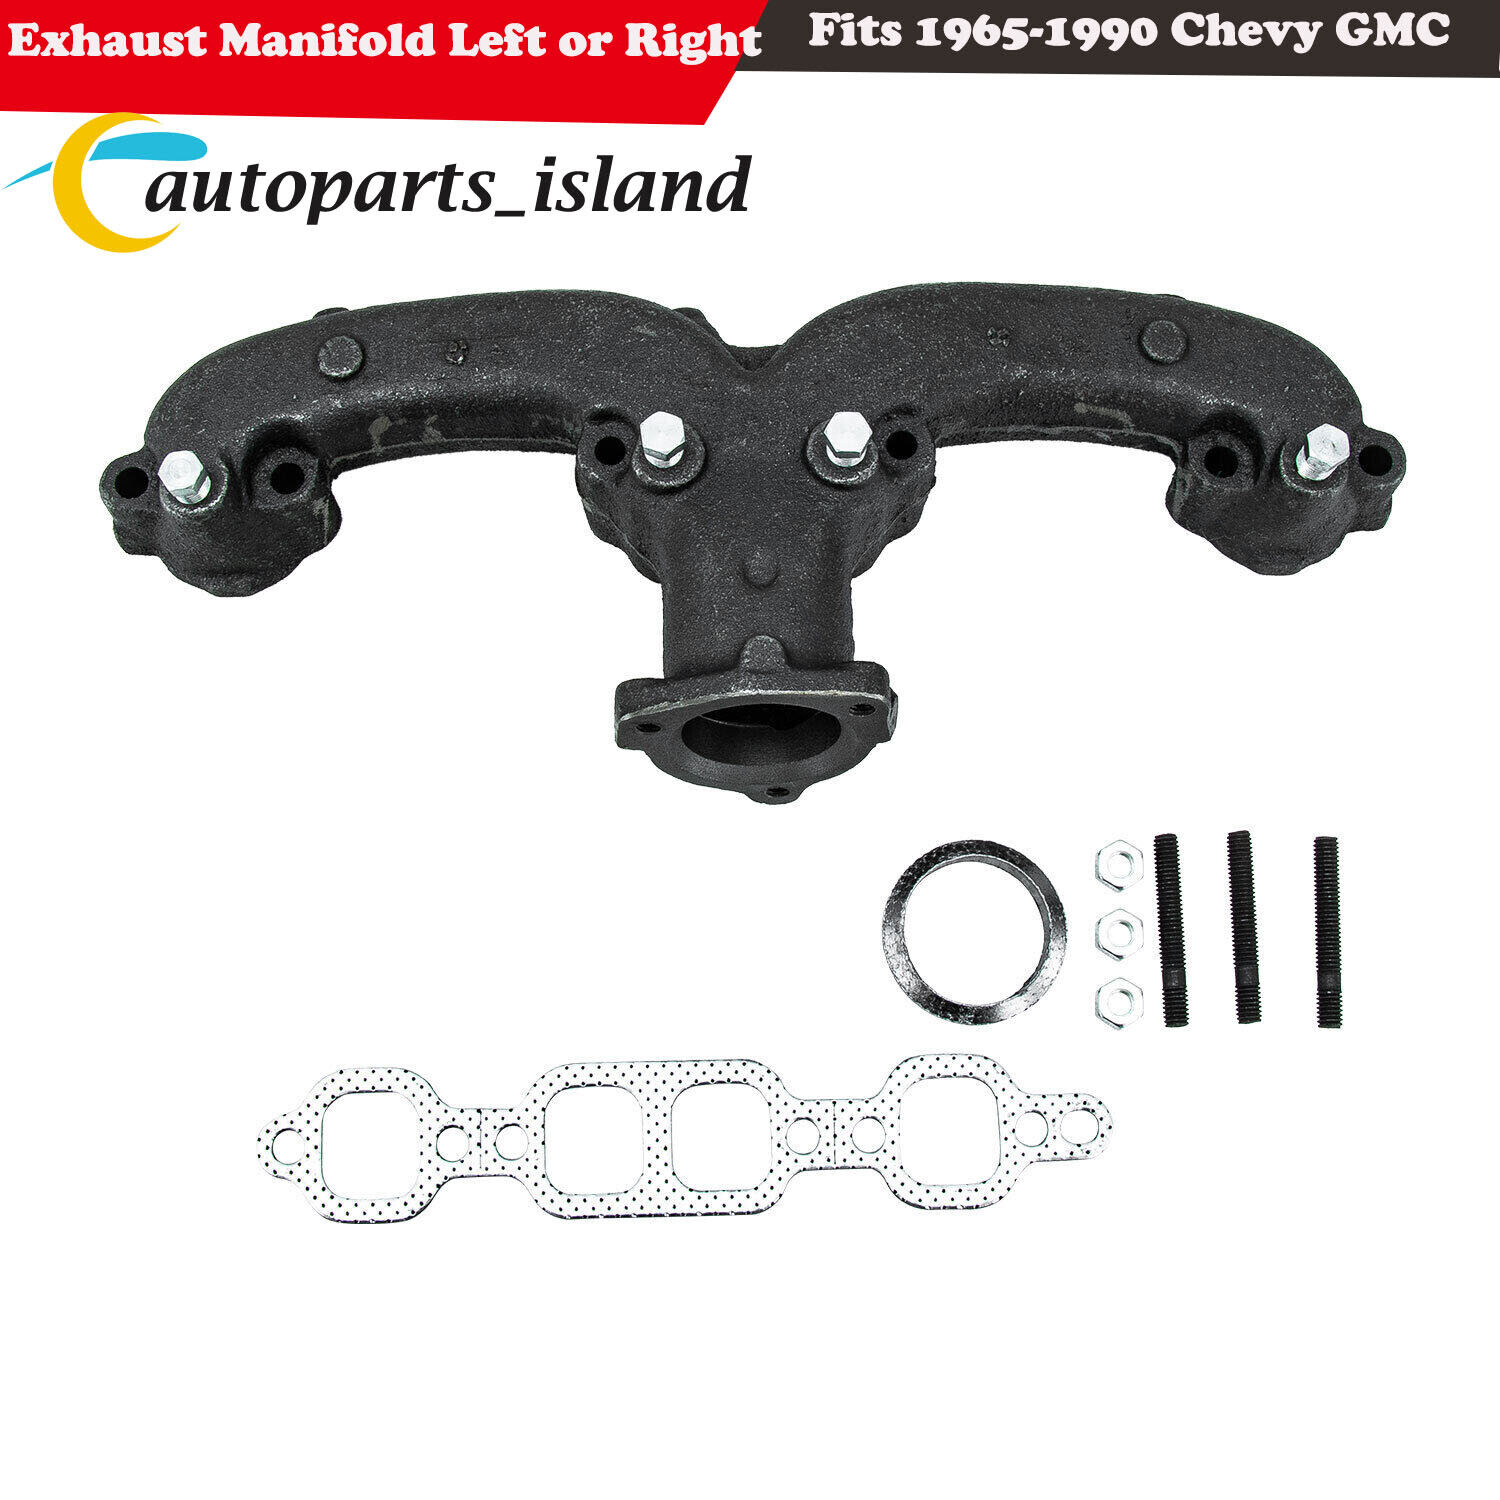 Exhaust Manifold Left or Right Fits 1965-1990 Chevy GMC Van Pickup Small Hot